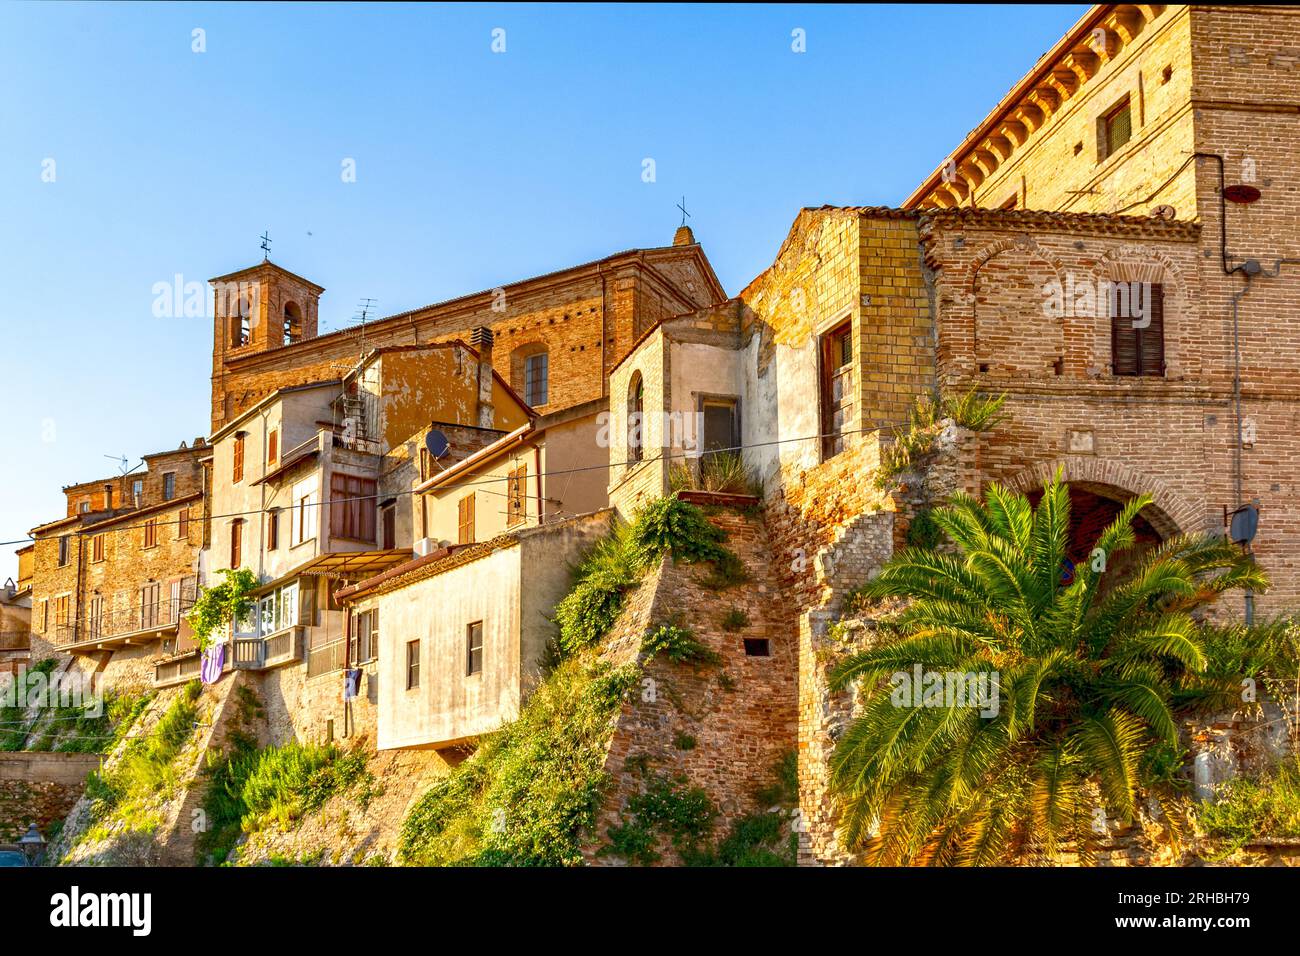 Massignano village, urban lanscape in Italy, Marche, church and old houses Stock Photo